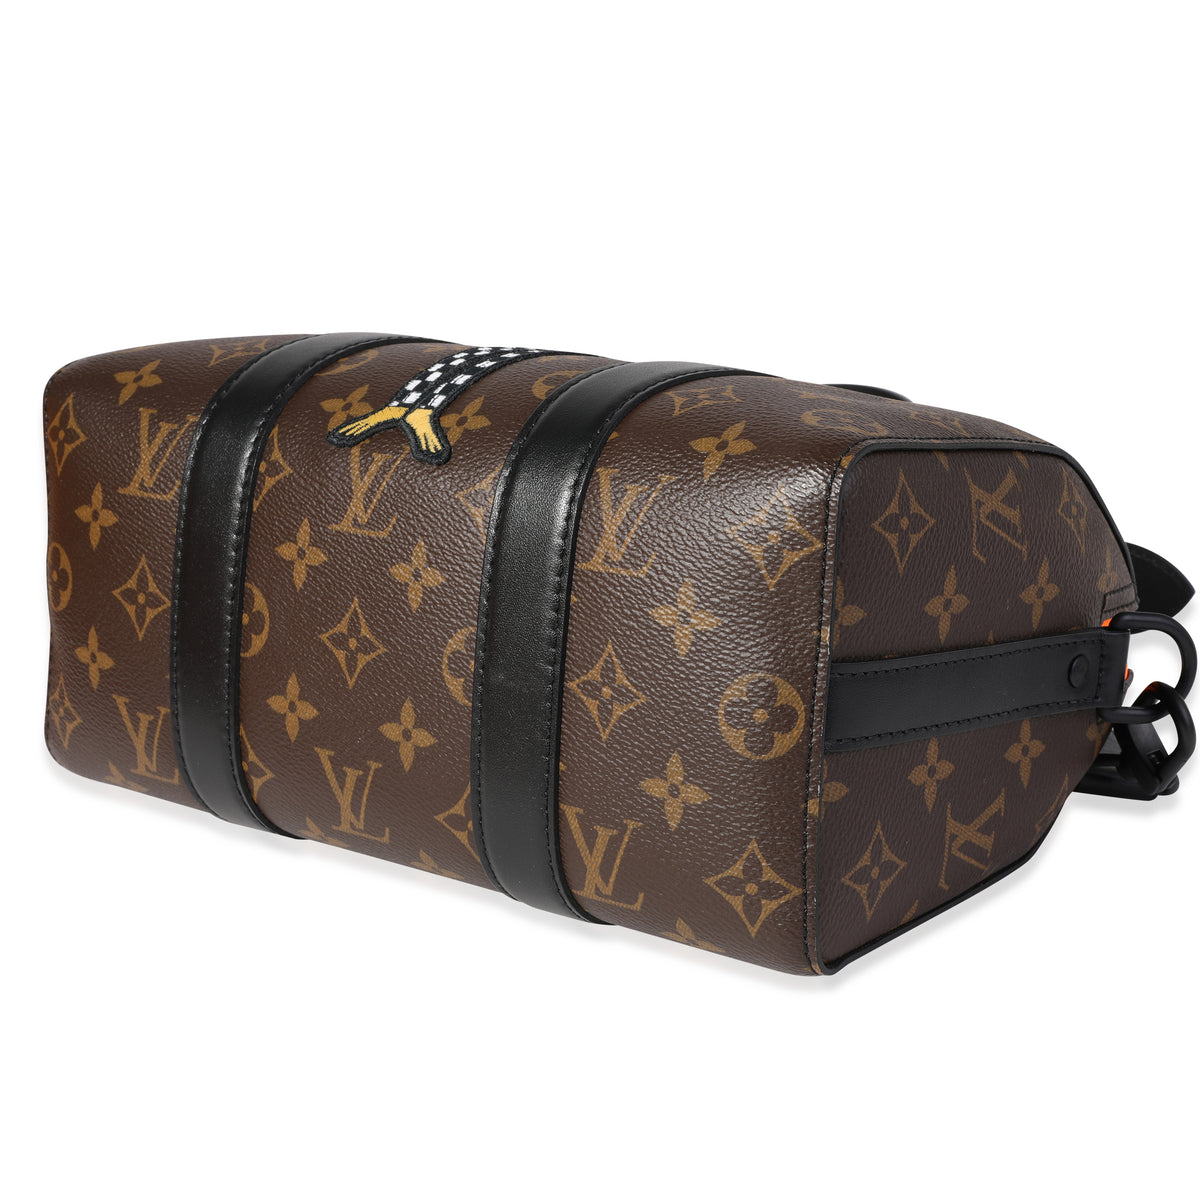 best site for replica LV jewelry sale via Paypal